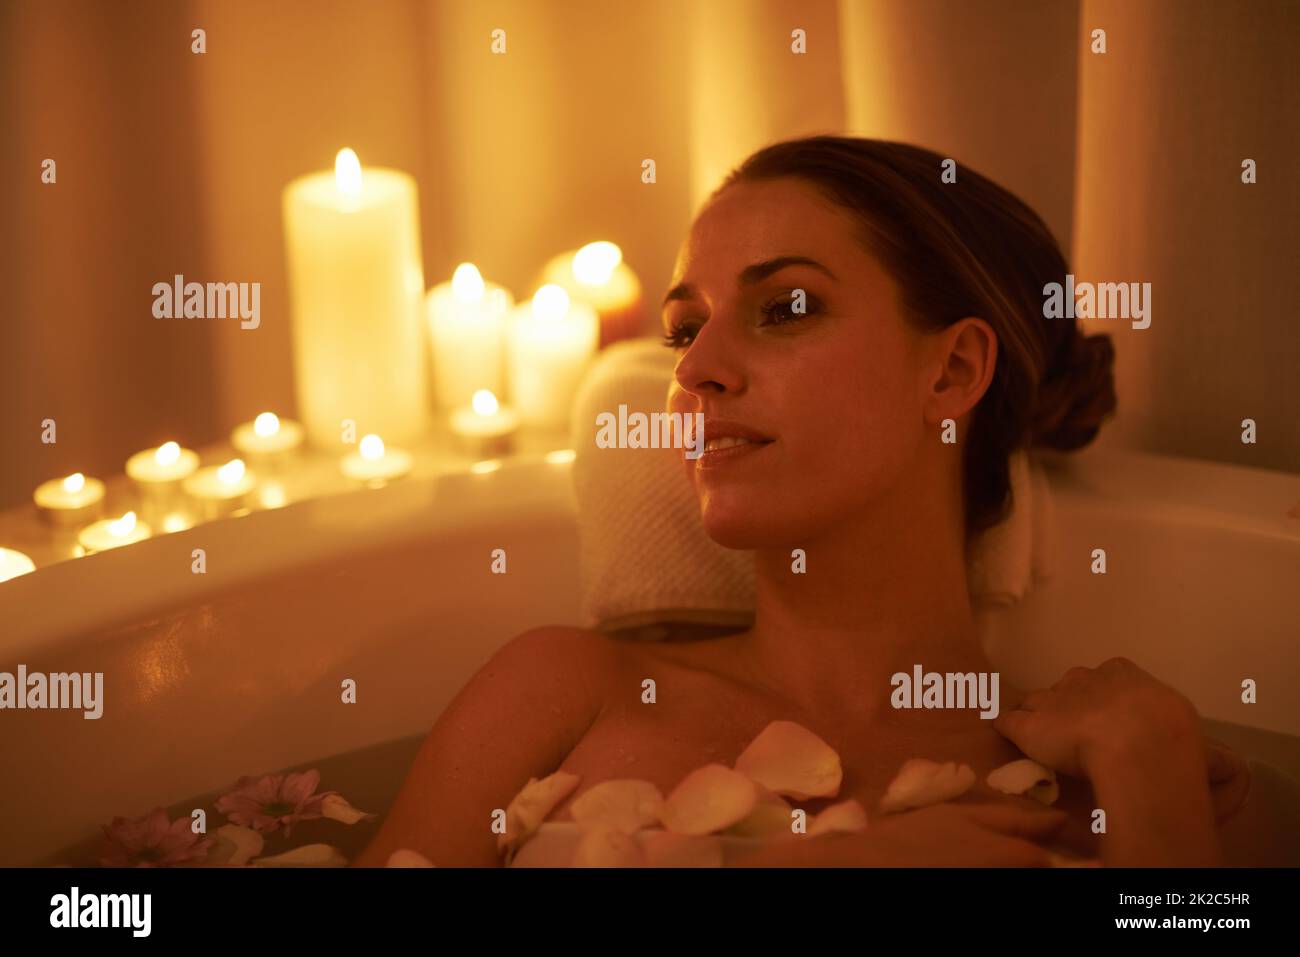 https://c8.alamy.com/comp/2K2C5HR/soothed-by-the-ambiance-and-a-hot-bath-cropped-shot-of-a-gorgeous-woman-relaxing-in-a-candle-lit-bath-2K2C5HR.jpg